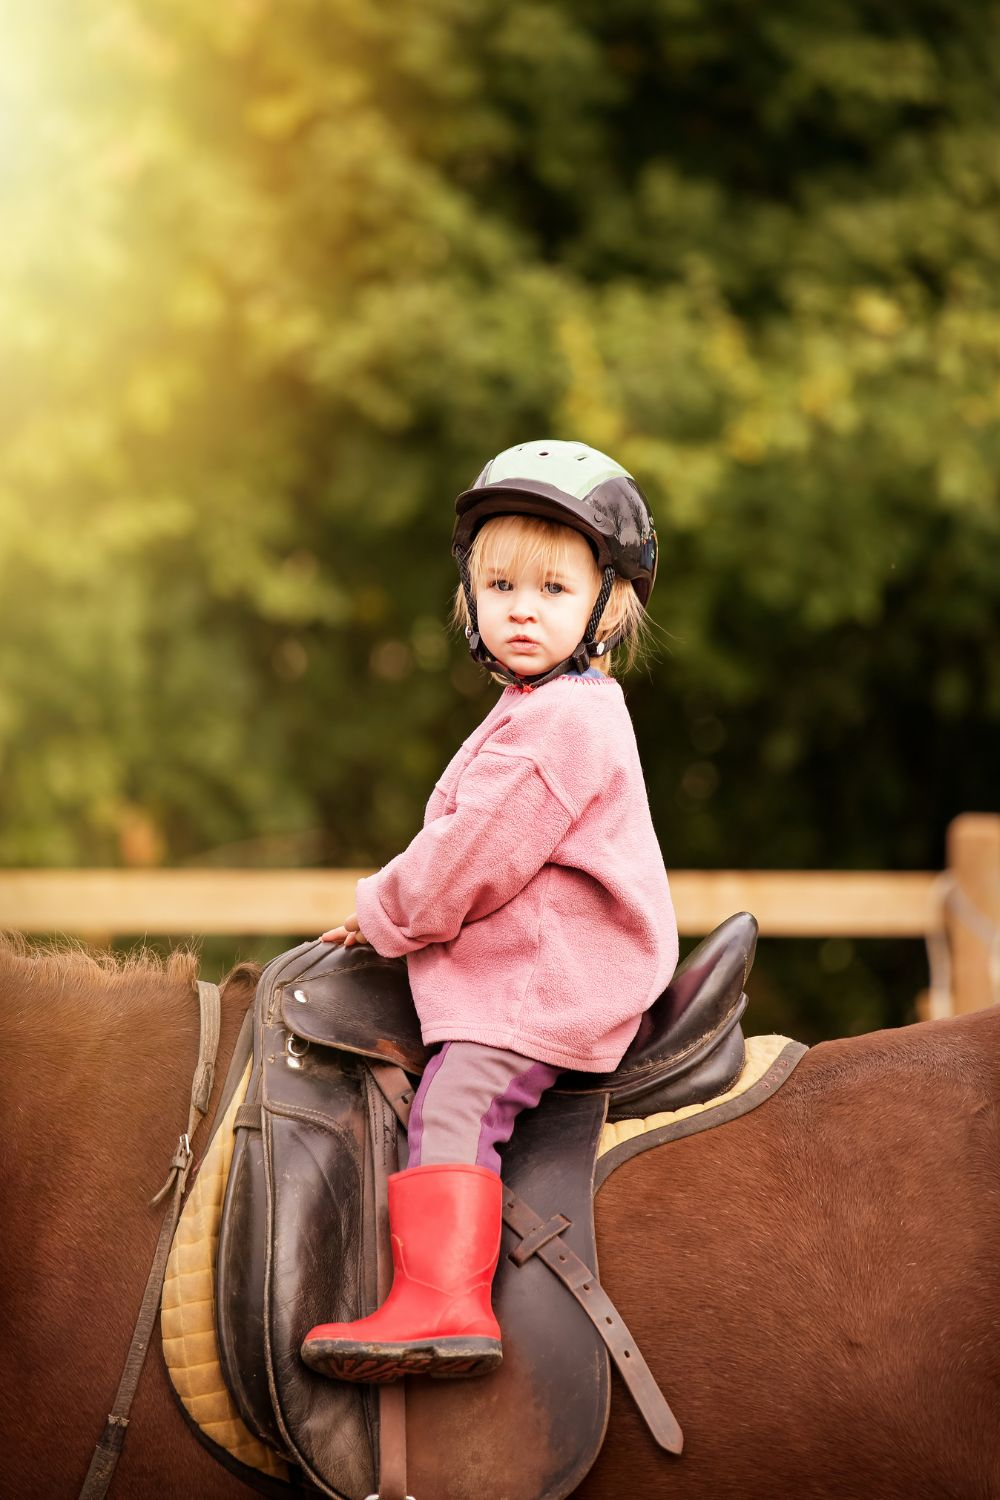 Little girl on horseback - old money families are famous for loving equestrian activities